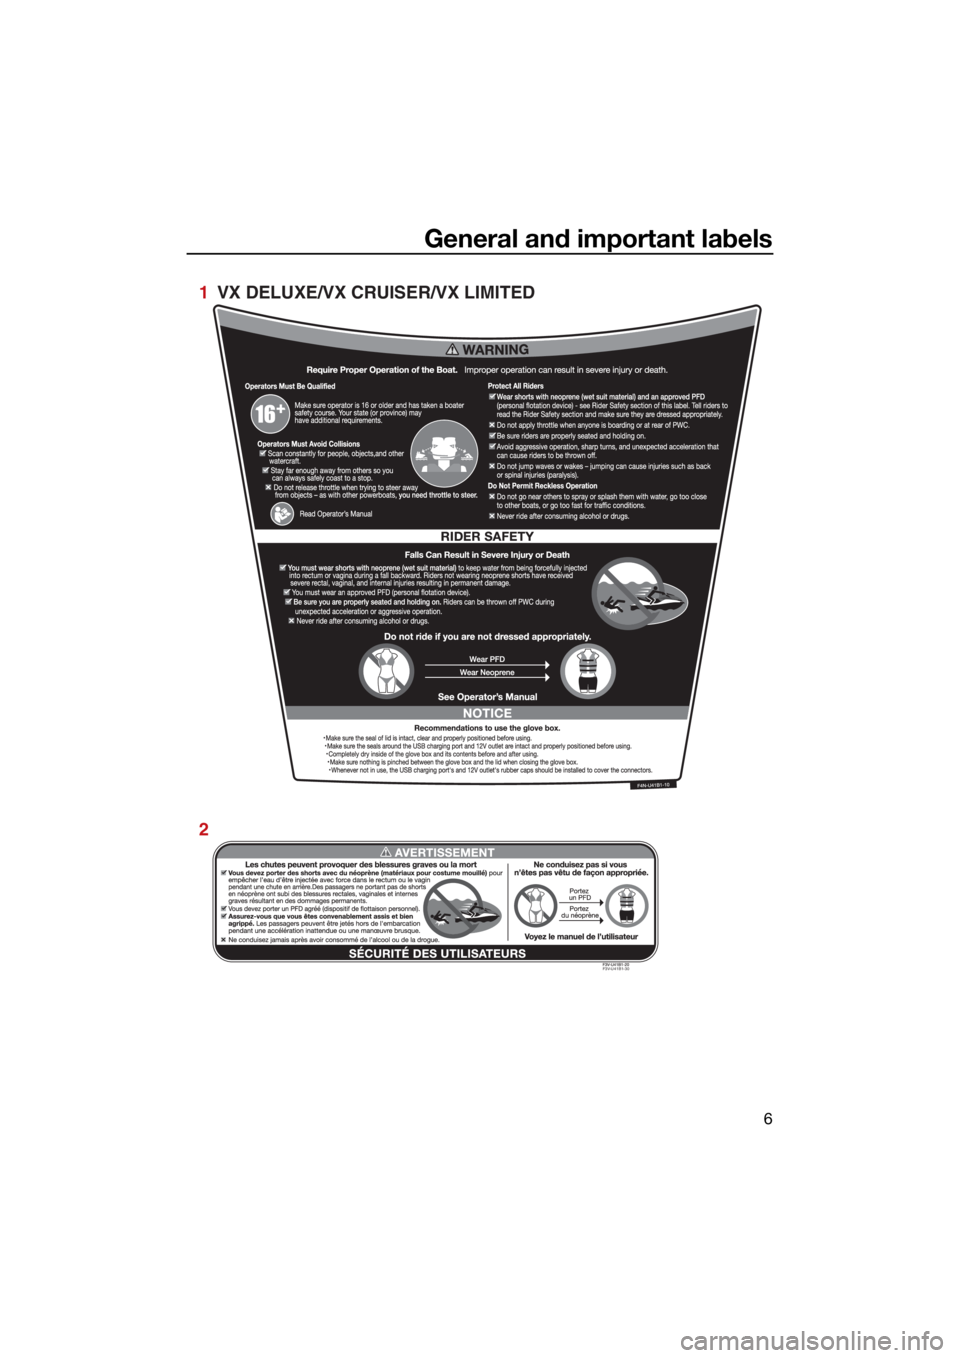 YAMAHA VX 2022 User Guide General and important labels
6
F3V-U41B1-30
1  VX DELUXE/VX CRUISER/VX LIMITED
2
UF4N71E0.book  Page 6  Thursday, August 5, 2021  11:58 AM 